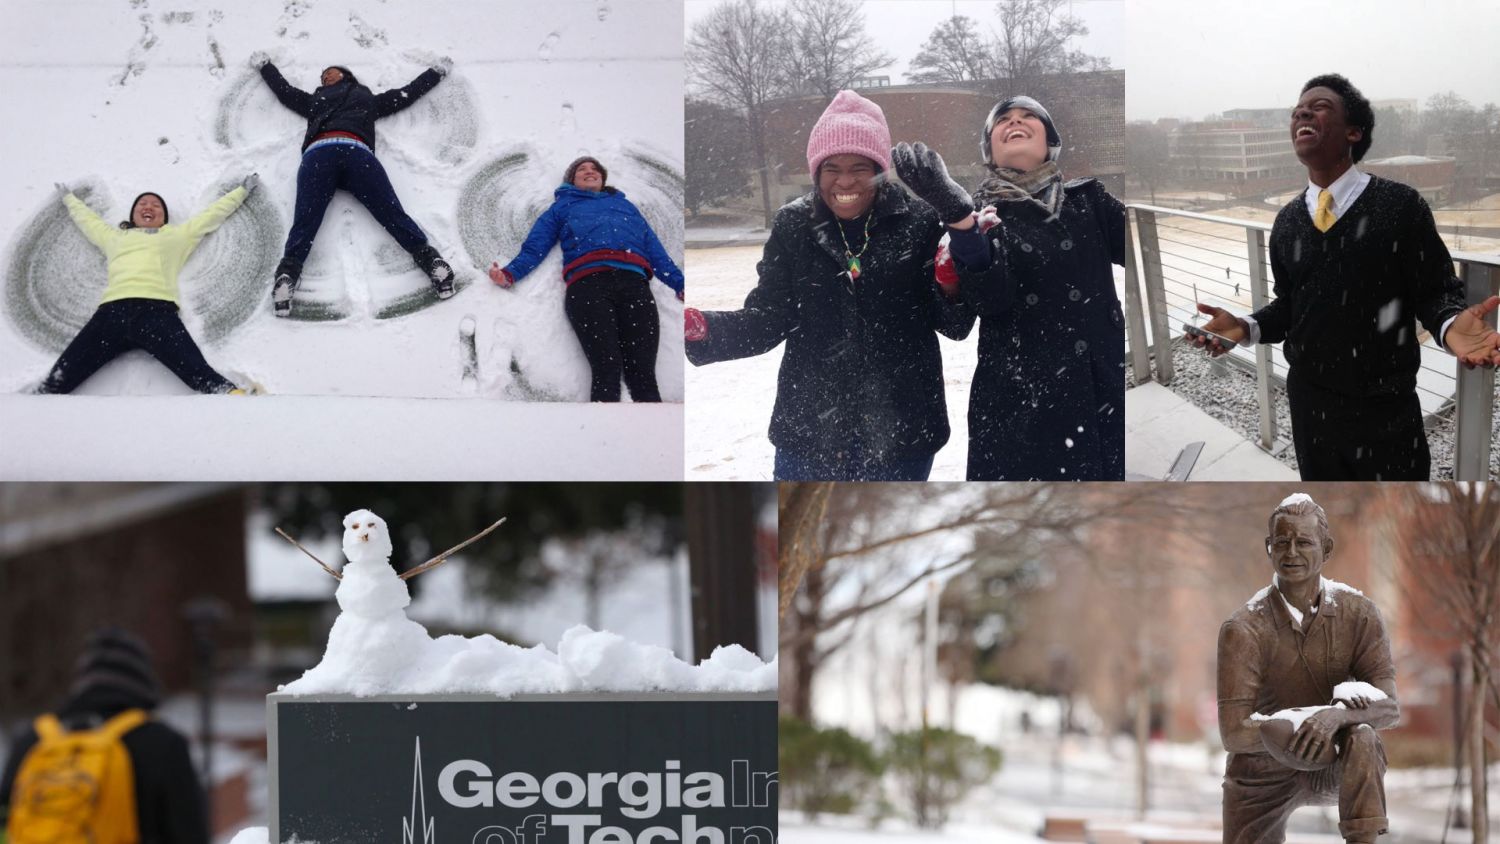 Scenes of Georgia Tech students playing in snow